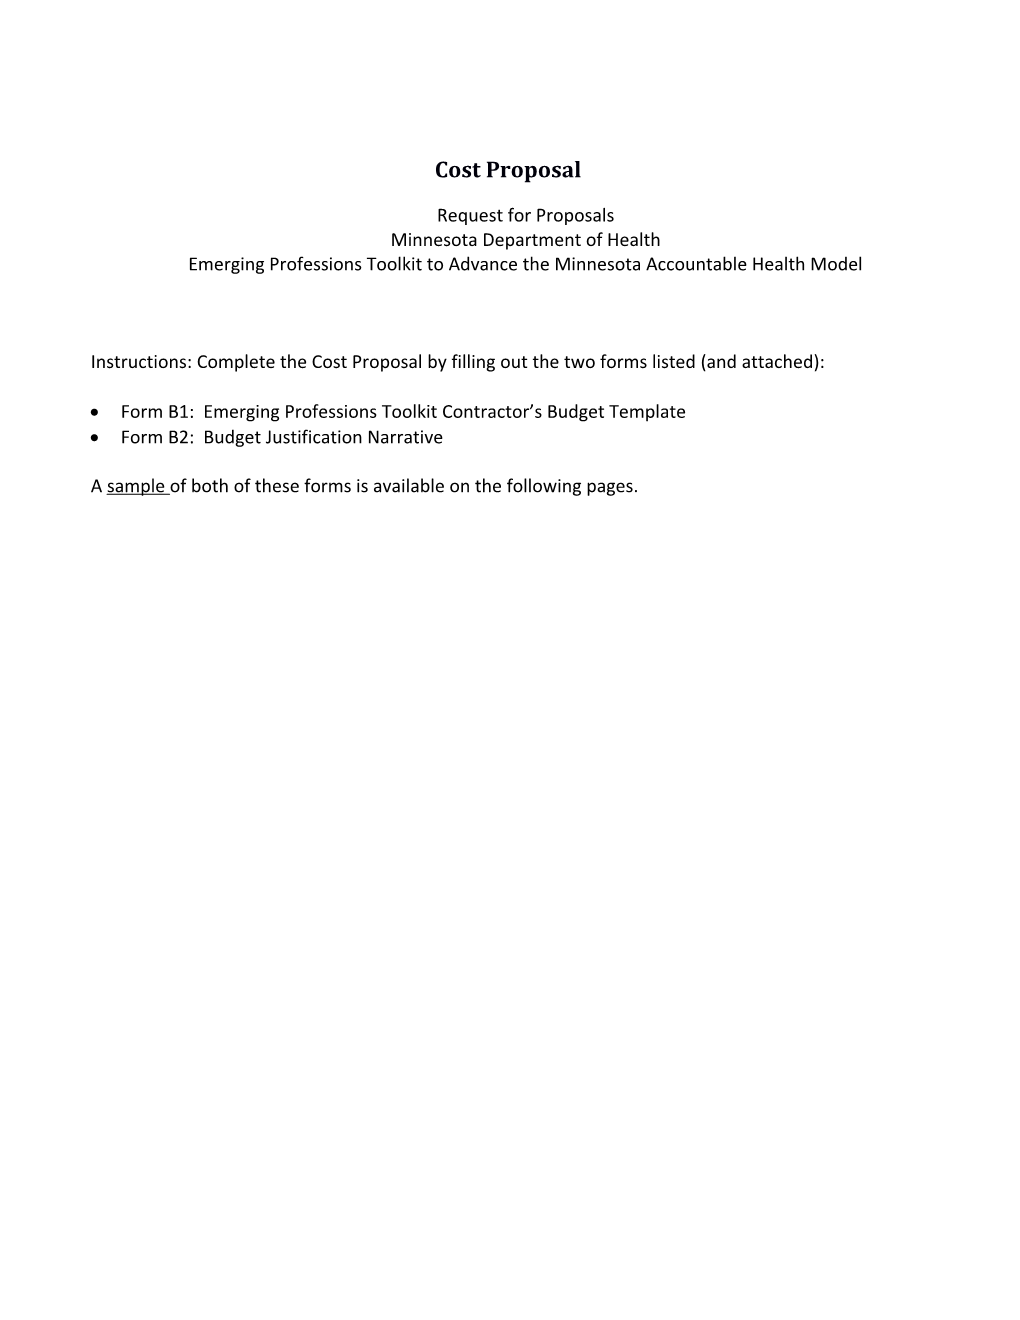 Emerging Professions Toolkit Program - Request for Proposals